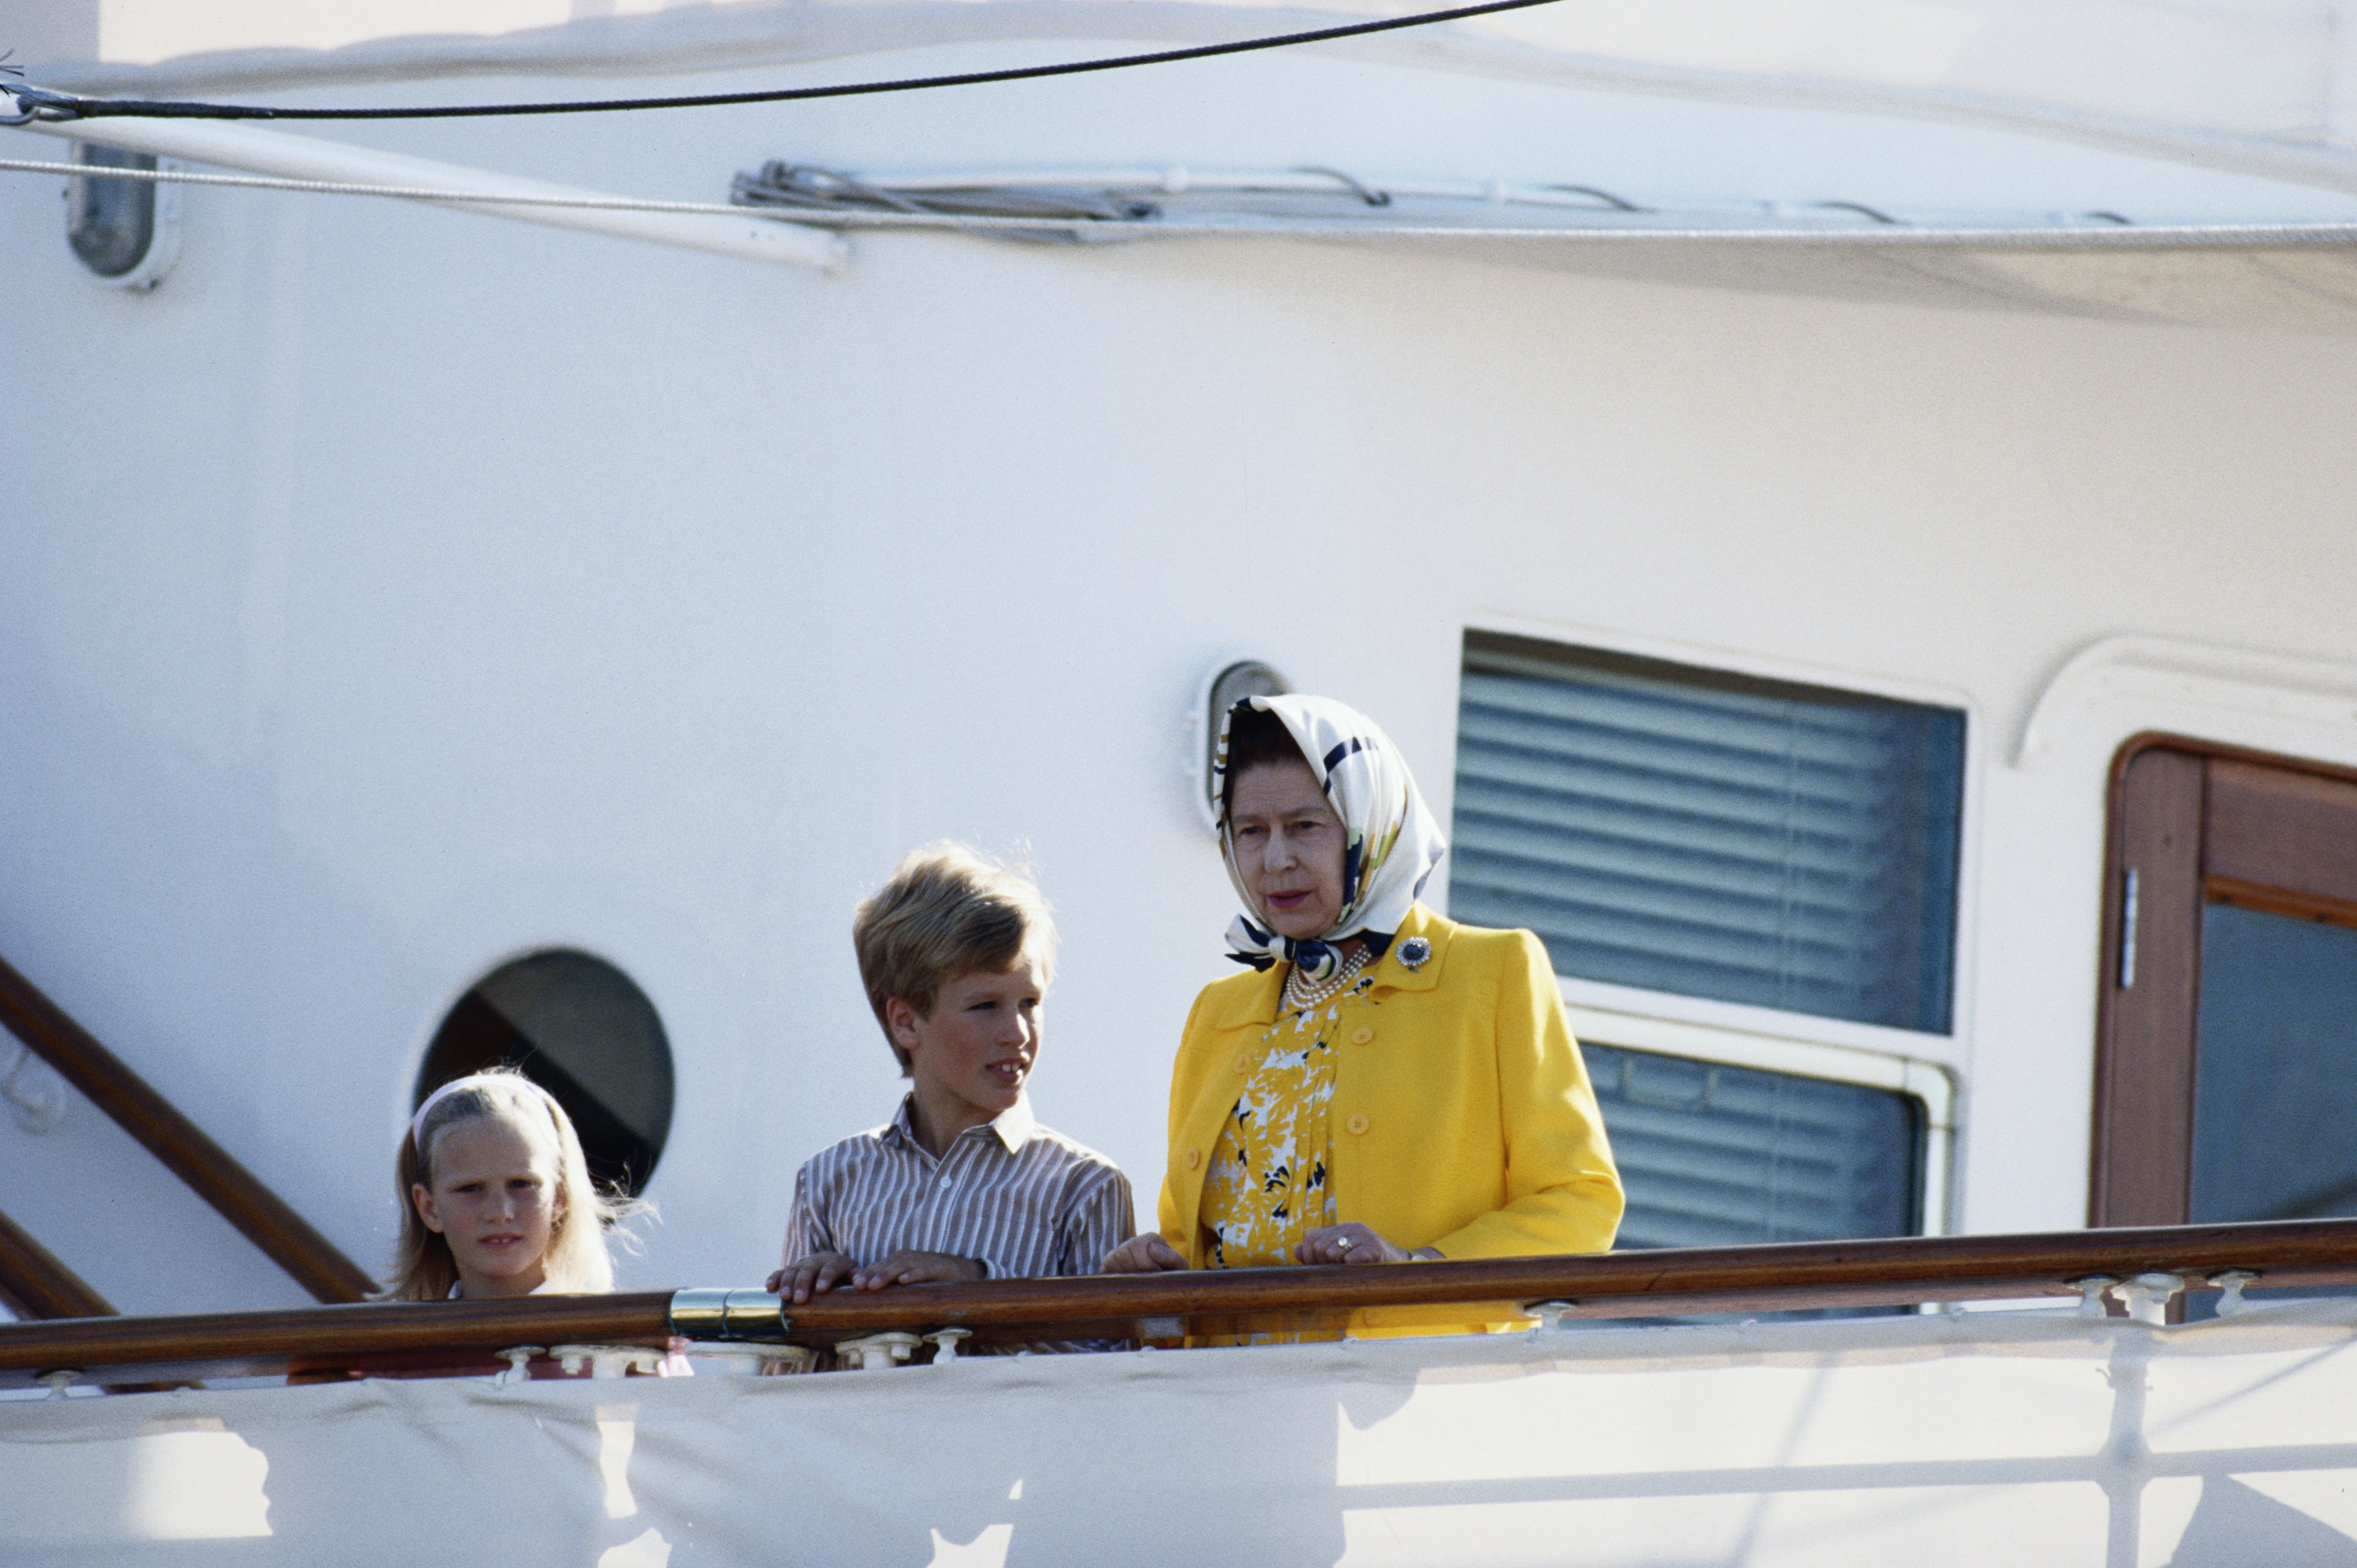 Zara Phillips with her brother, Peter Philips, and their grandmother, Queen Elizabeth II, on board the Royal yacht Britannia at the start of a Western Isles cruise, Great Britain, 5 August 1988 | Source: Getty Images 